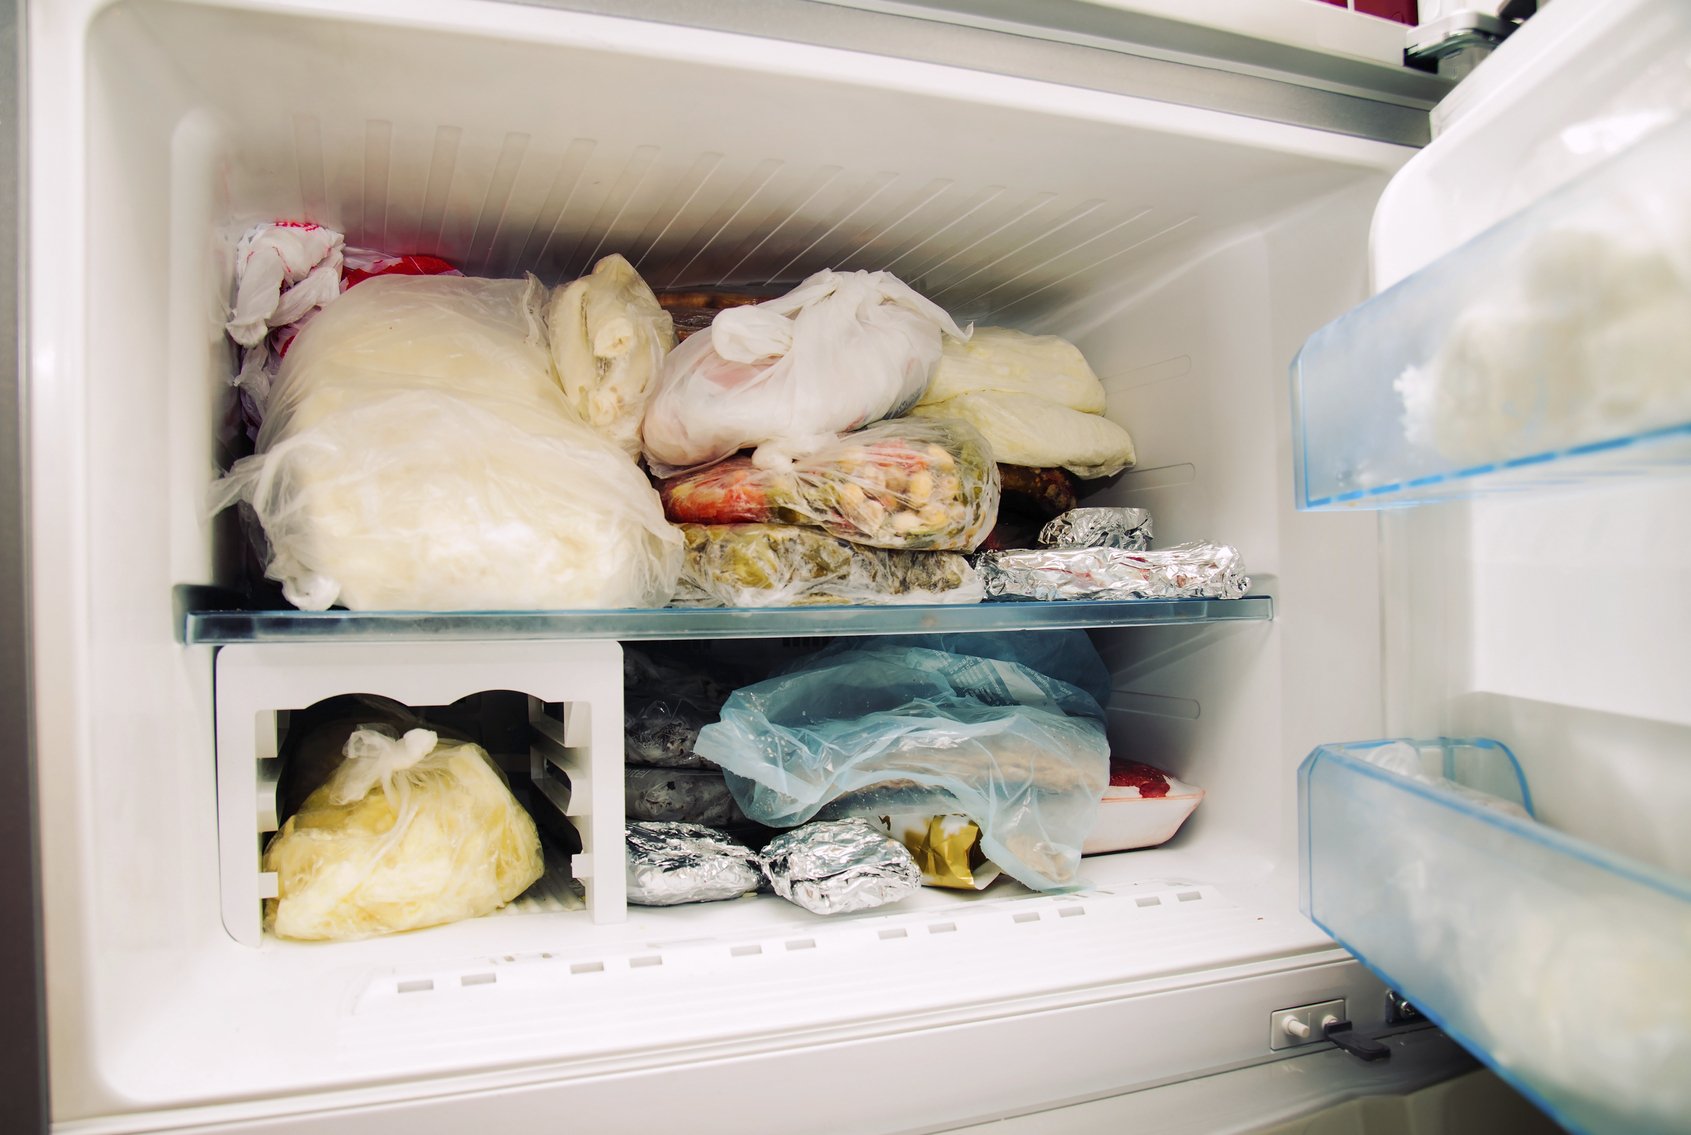 Some commercials policies allow for coverage after a power outage that results in spoiled refrigerator or freezer food. (Photo: iStock)